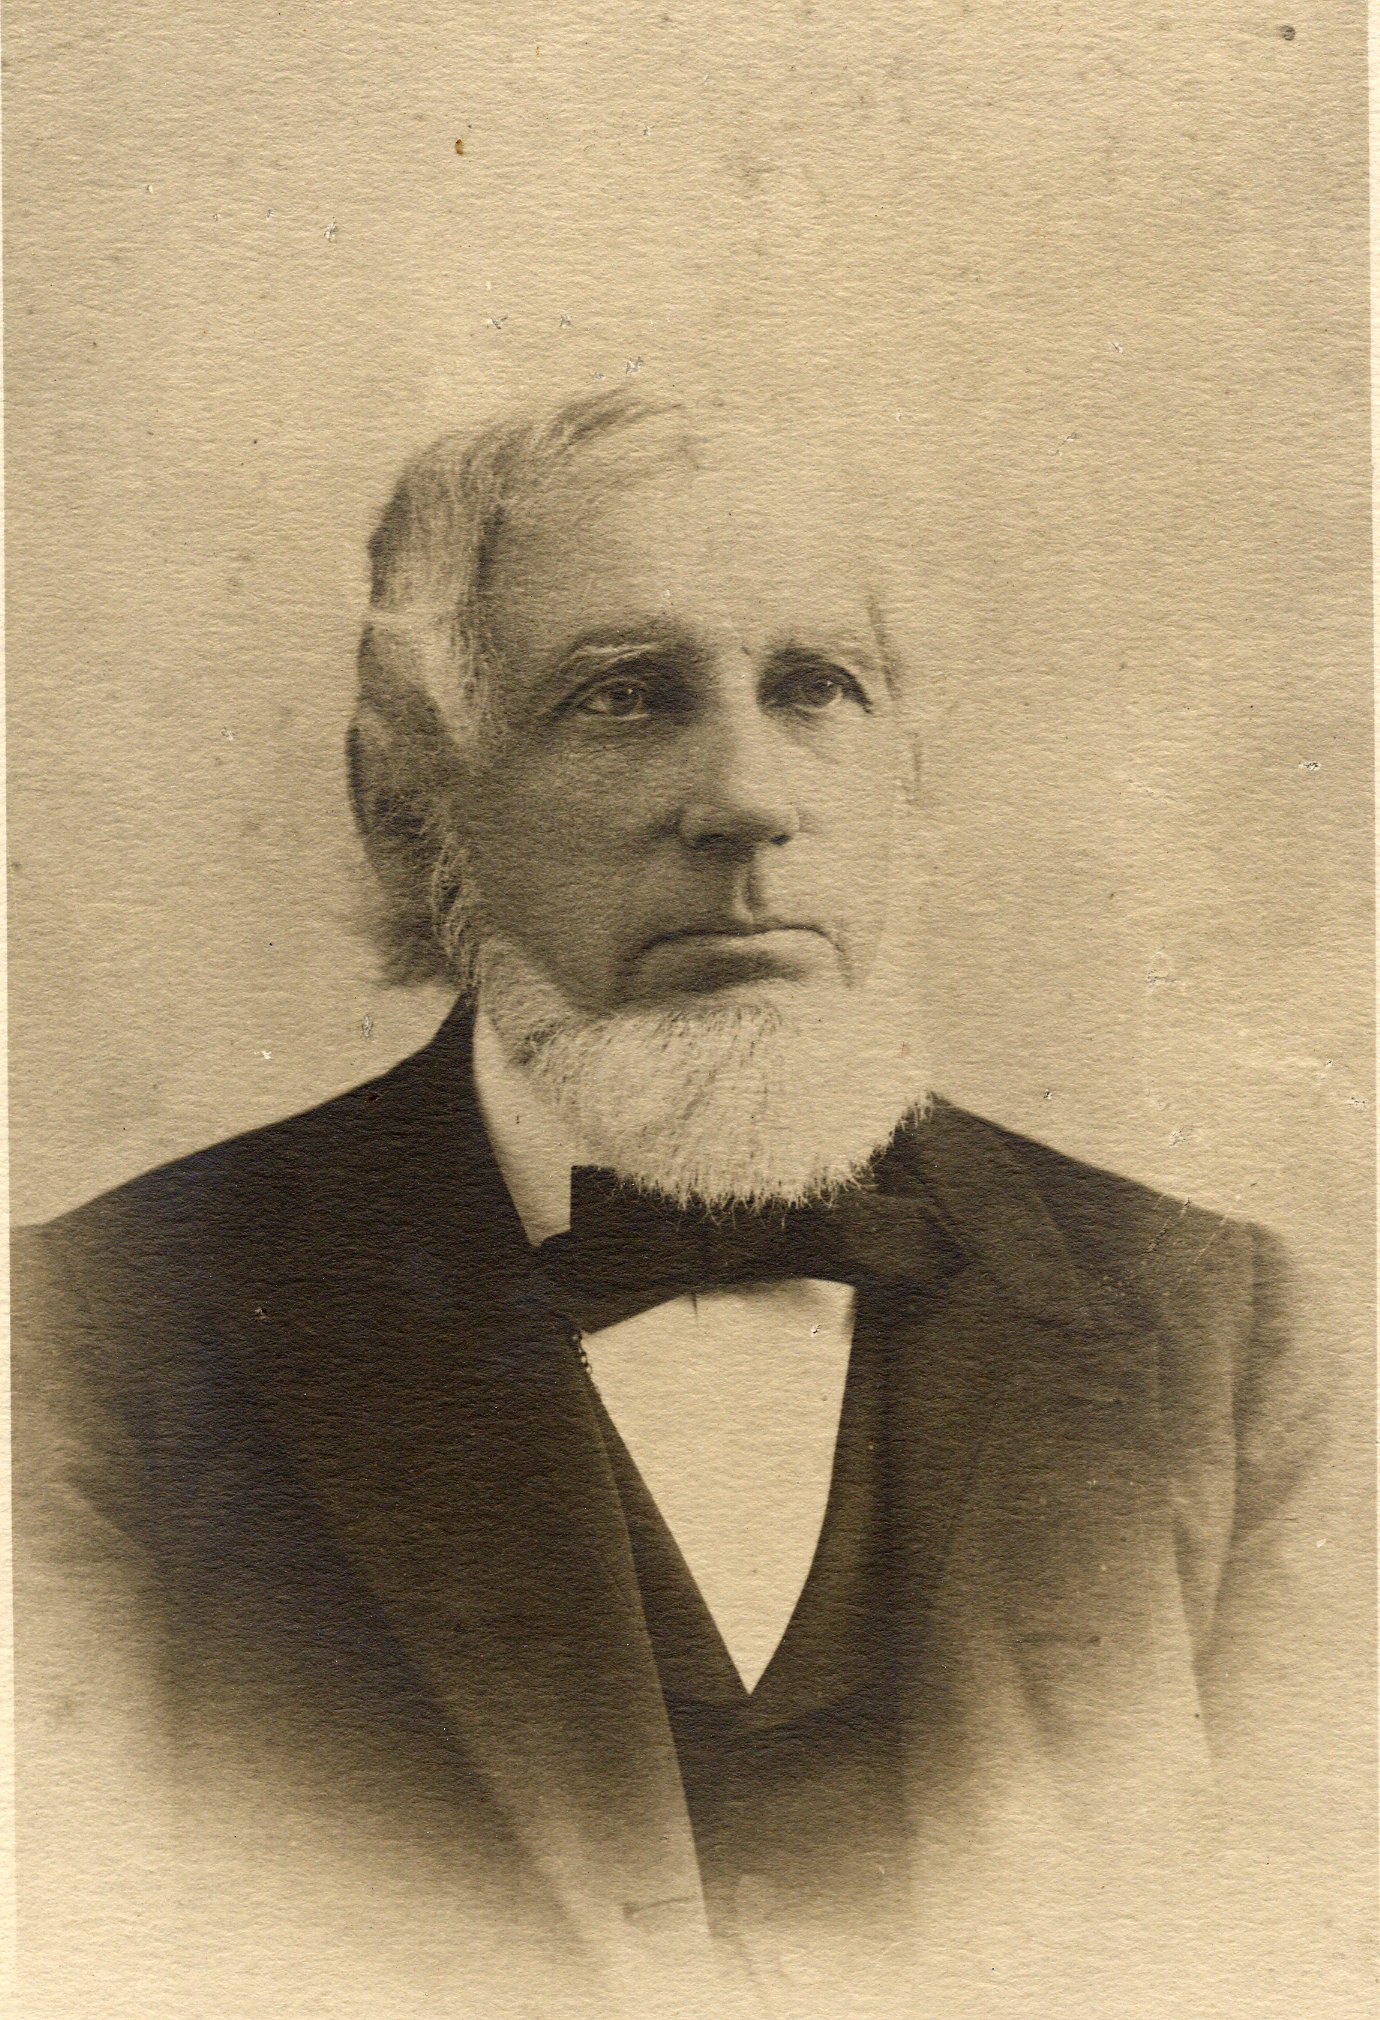 Theophilus A. Wylie